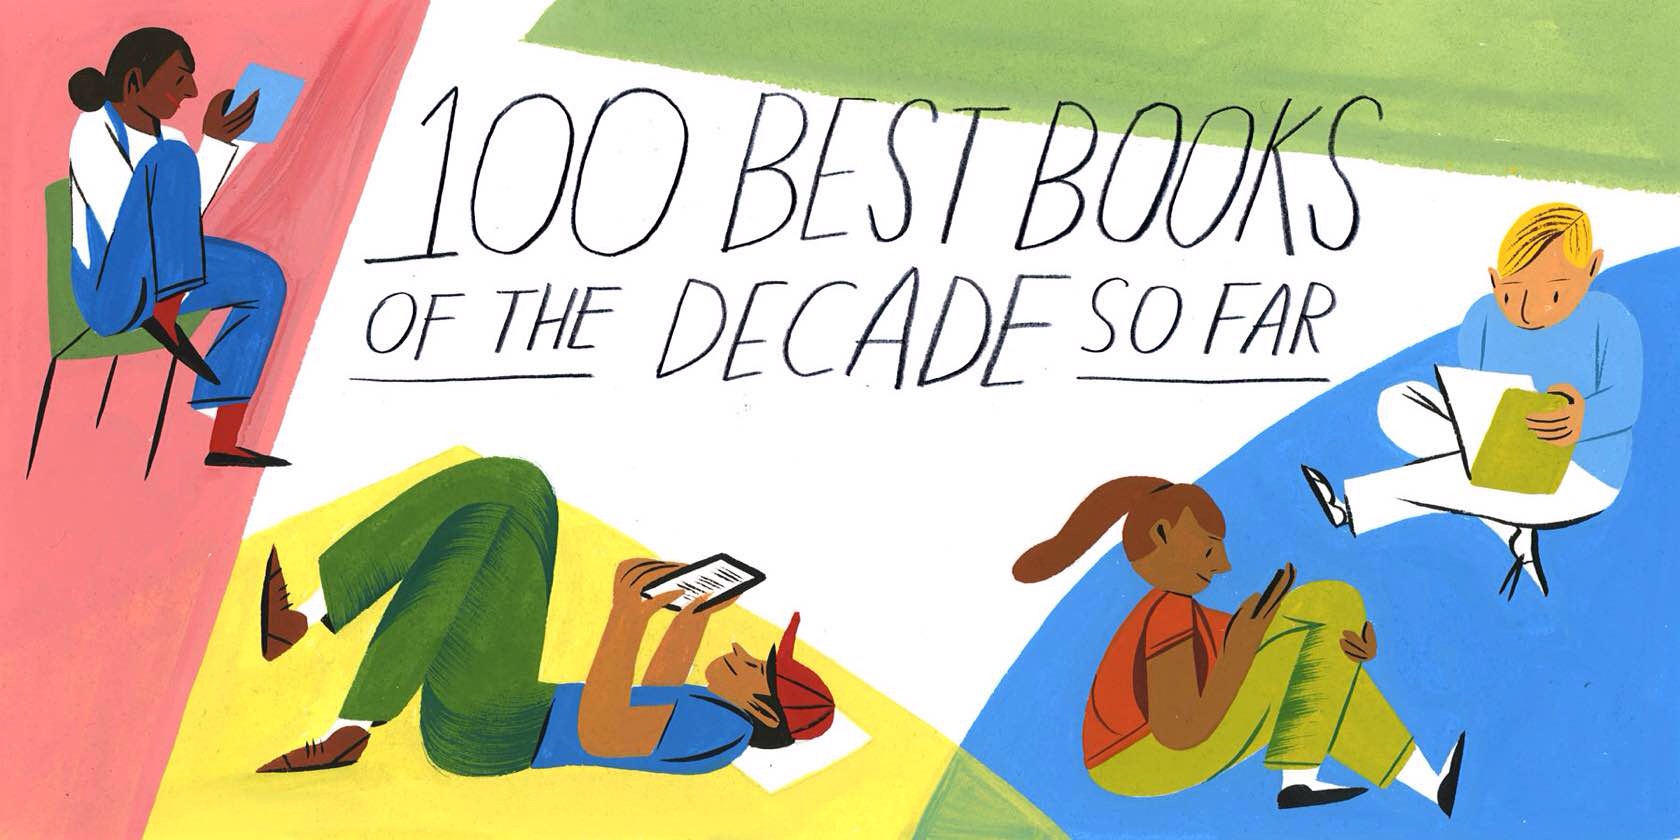 Oyster Review's Top 100 Books of the Decade so Far